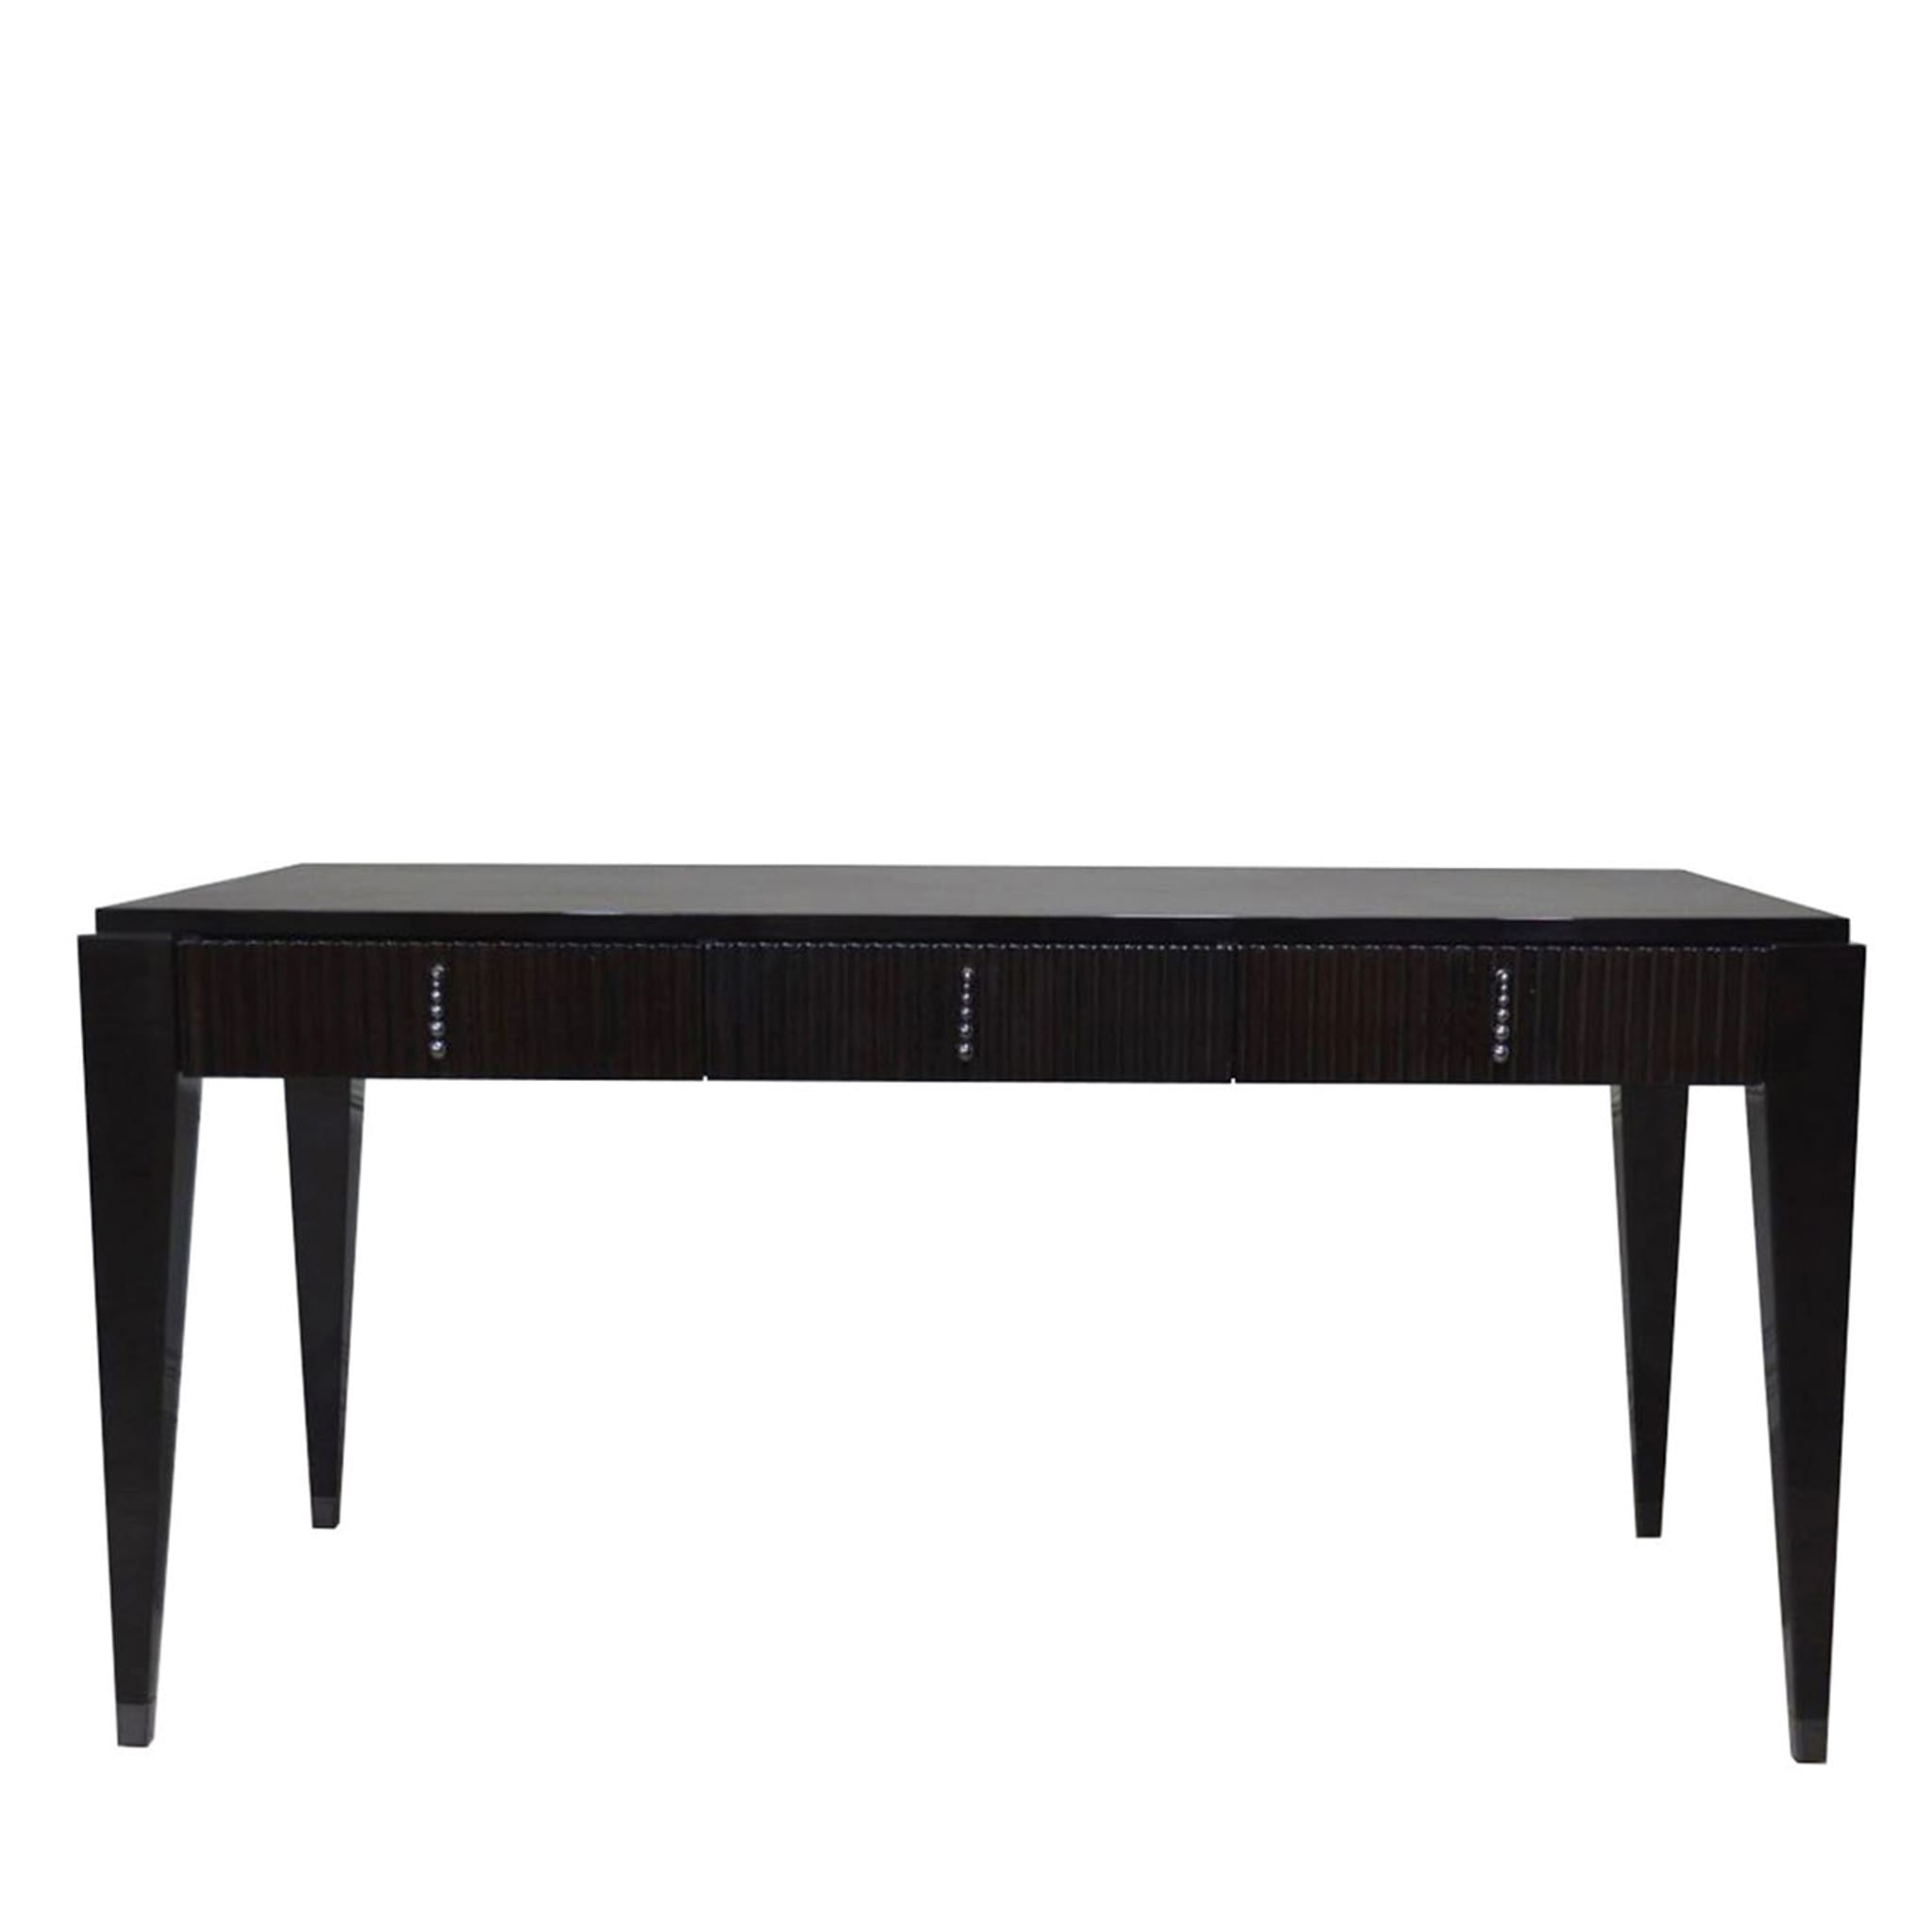  ‘Klab D’ Contemporary Ebony High-Gloss Writing Desk with Leather Top - Main view